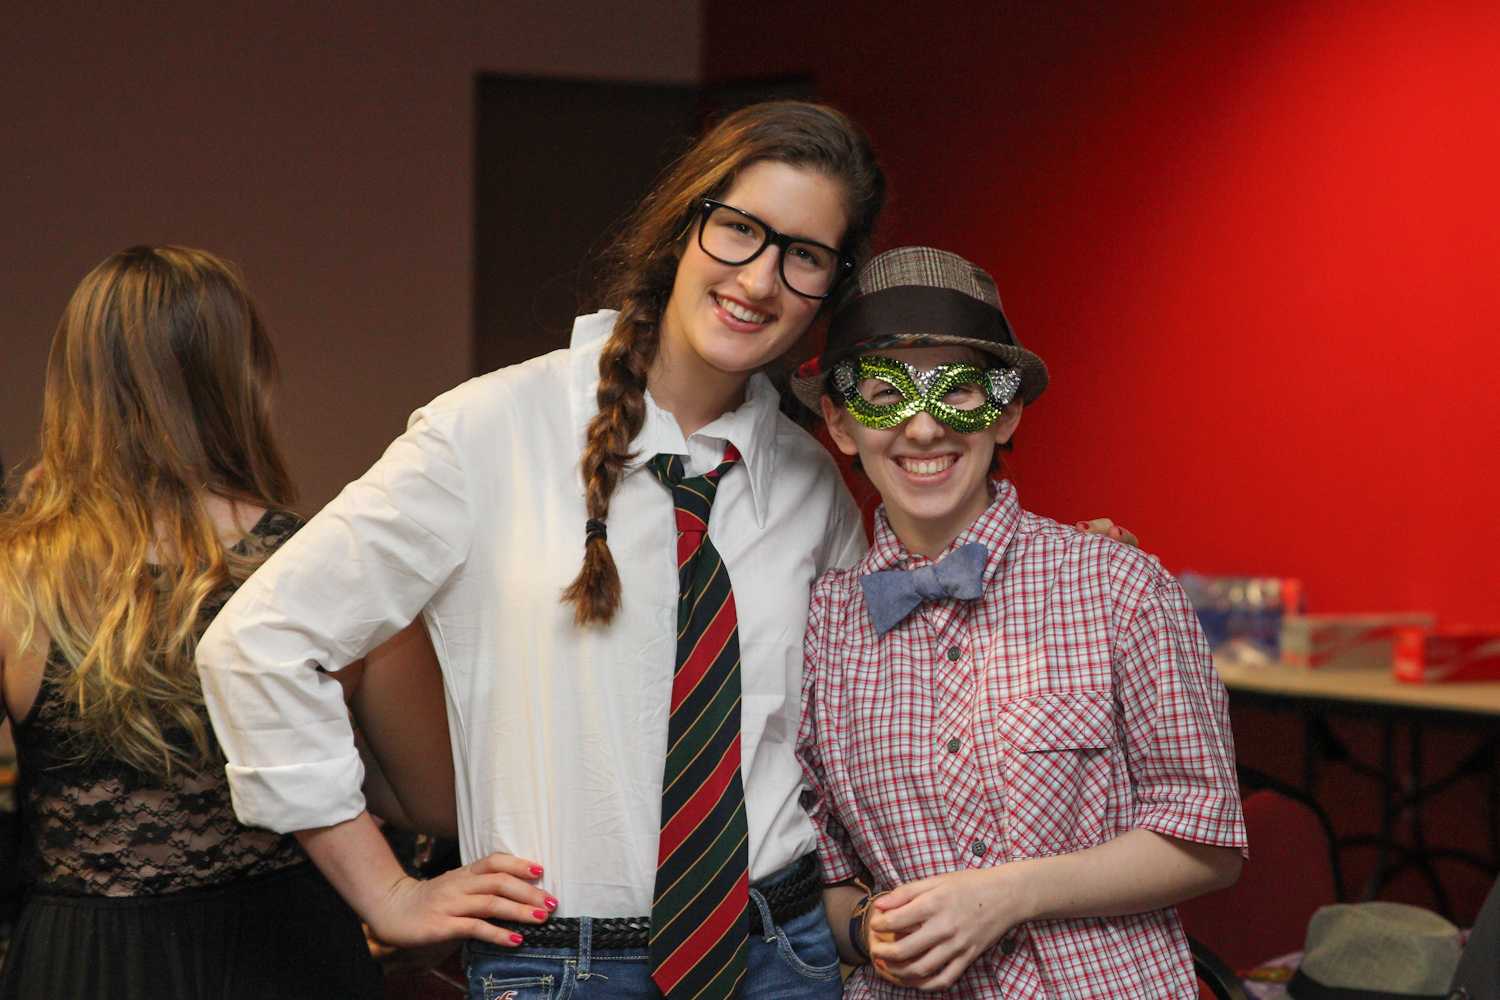 Students posing for a photo at the LGBTQA Gala on Friday Jan. 30th.